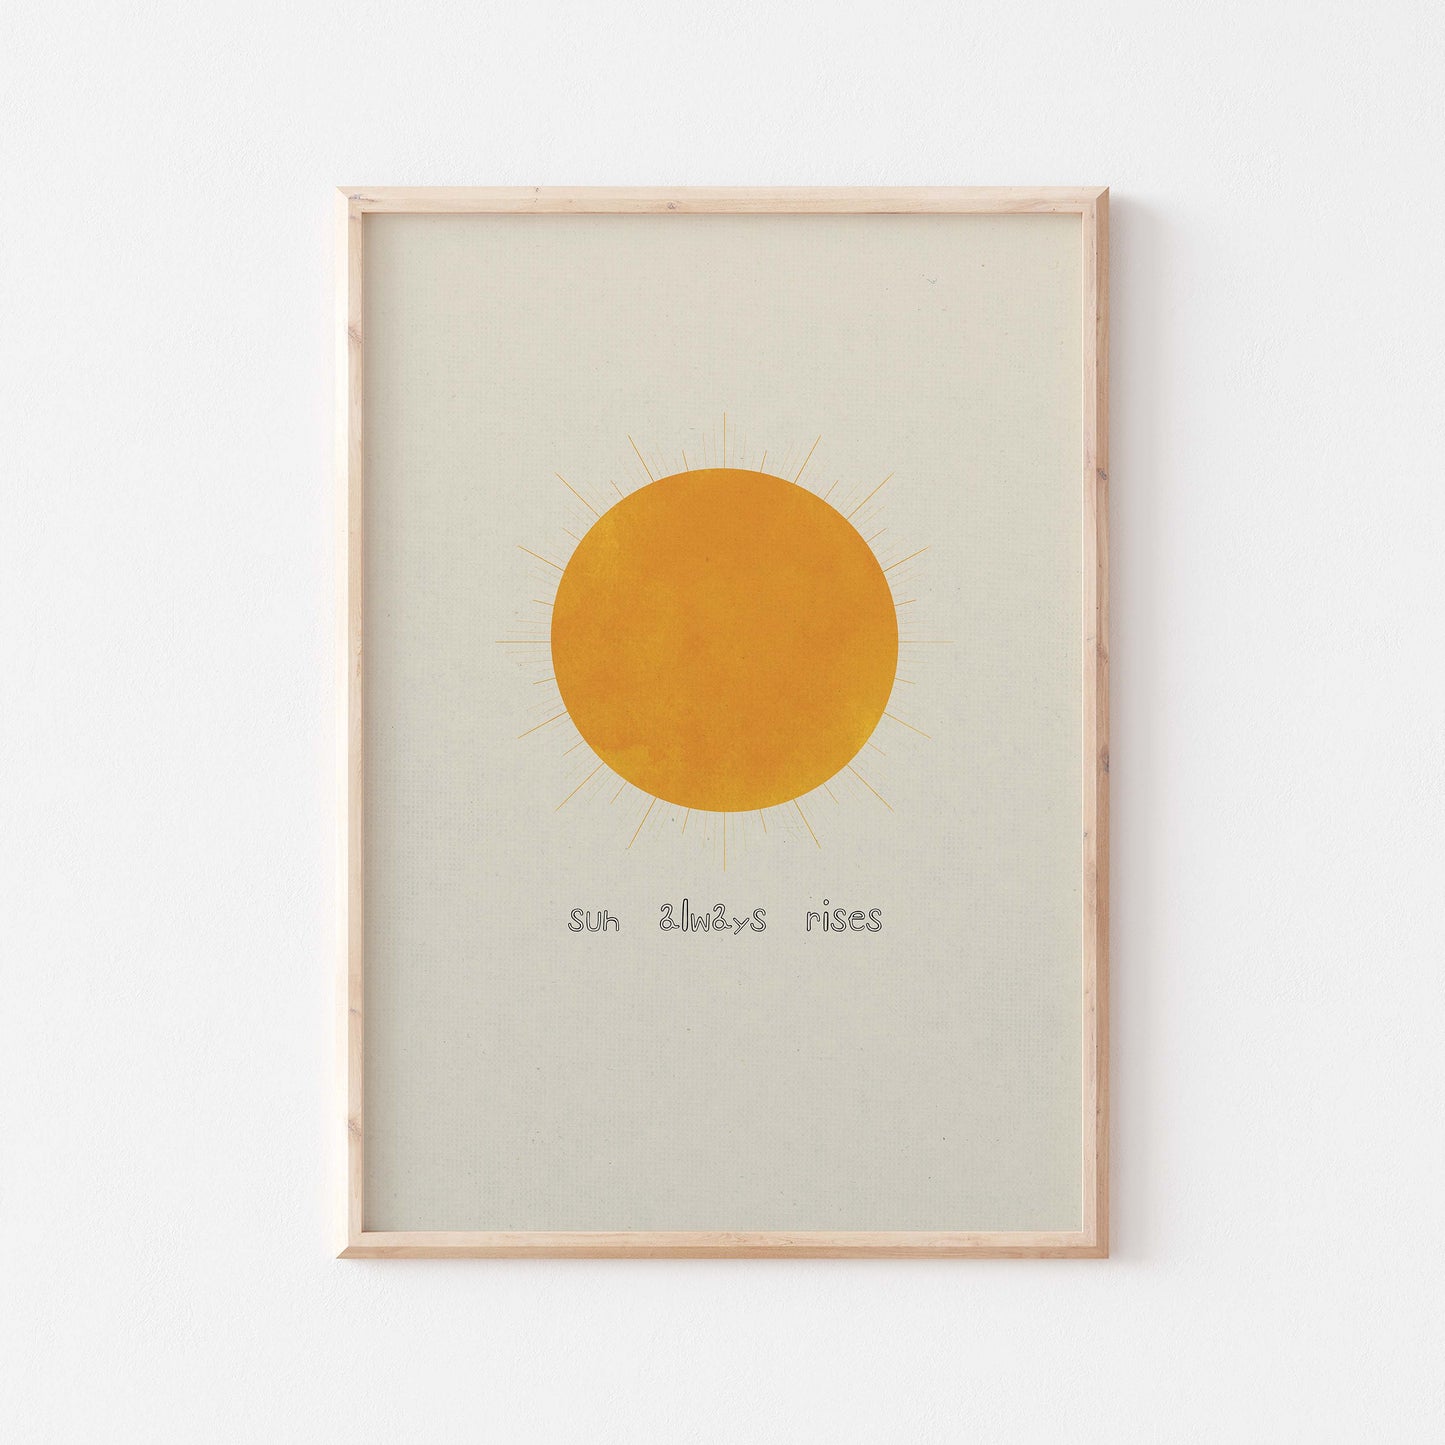 sun always rises quote in black with an illustration of sun in yellow on light beige background poster in light wood frame display